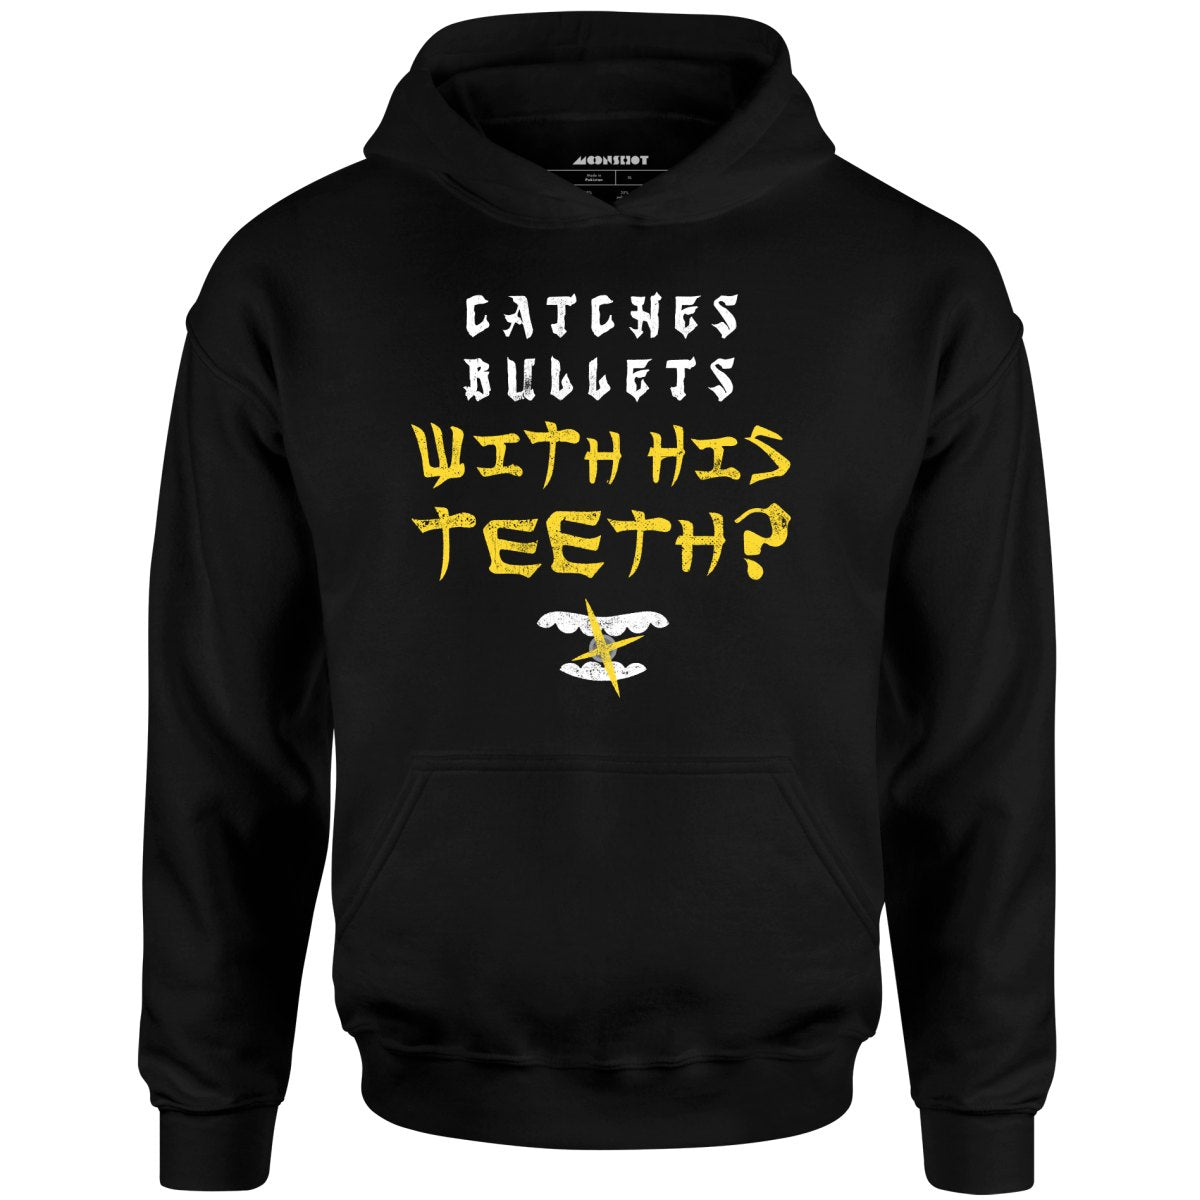 Last Dragon - Catches Bullets With His Teeth? - Unisex Hoodie